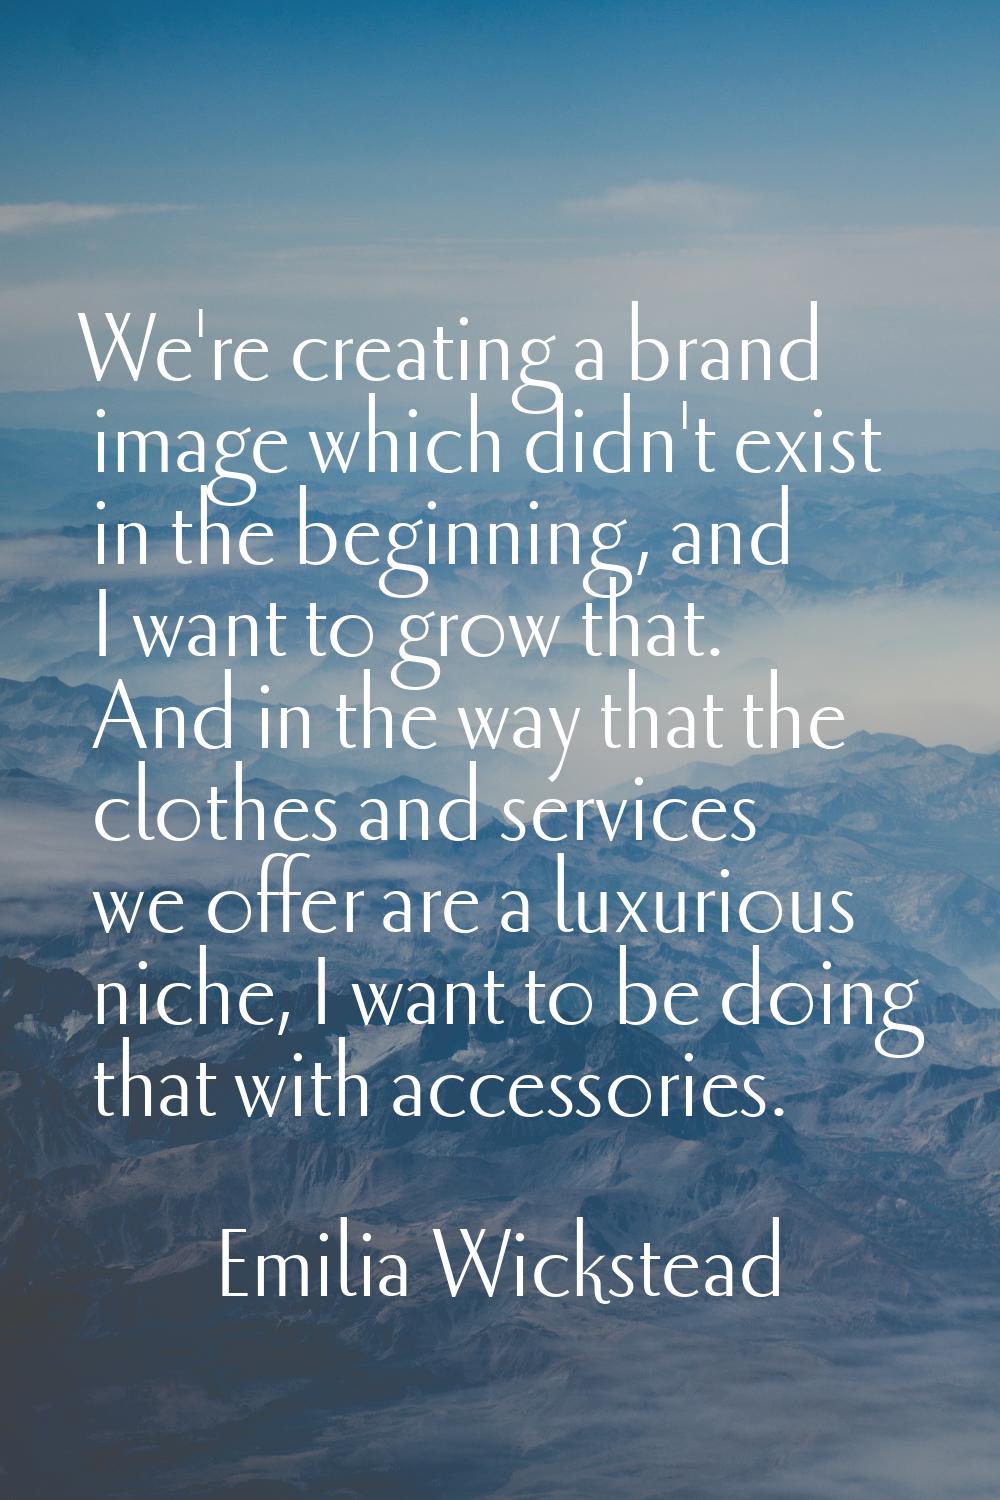 We're creating a brand image which didn't exist in the beginning, and I want to grow that. And in t